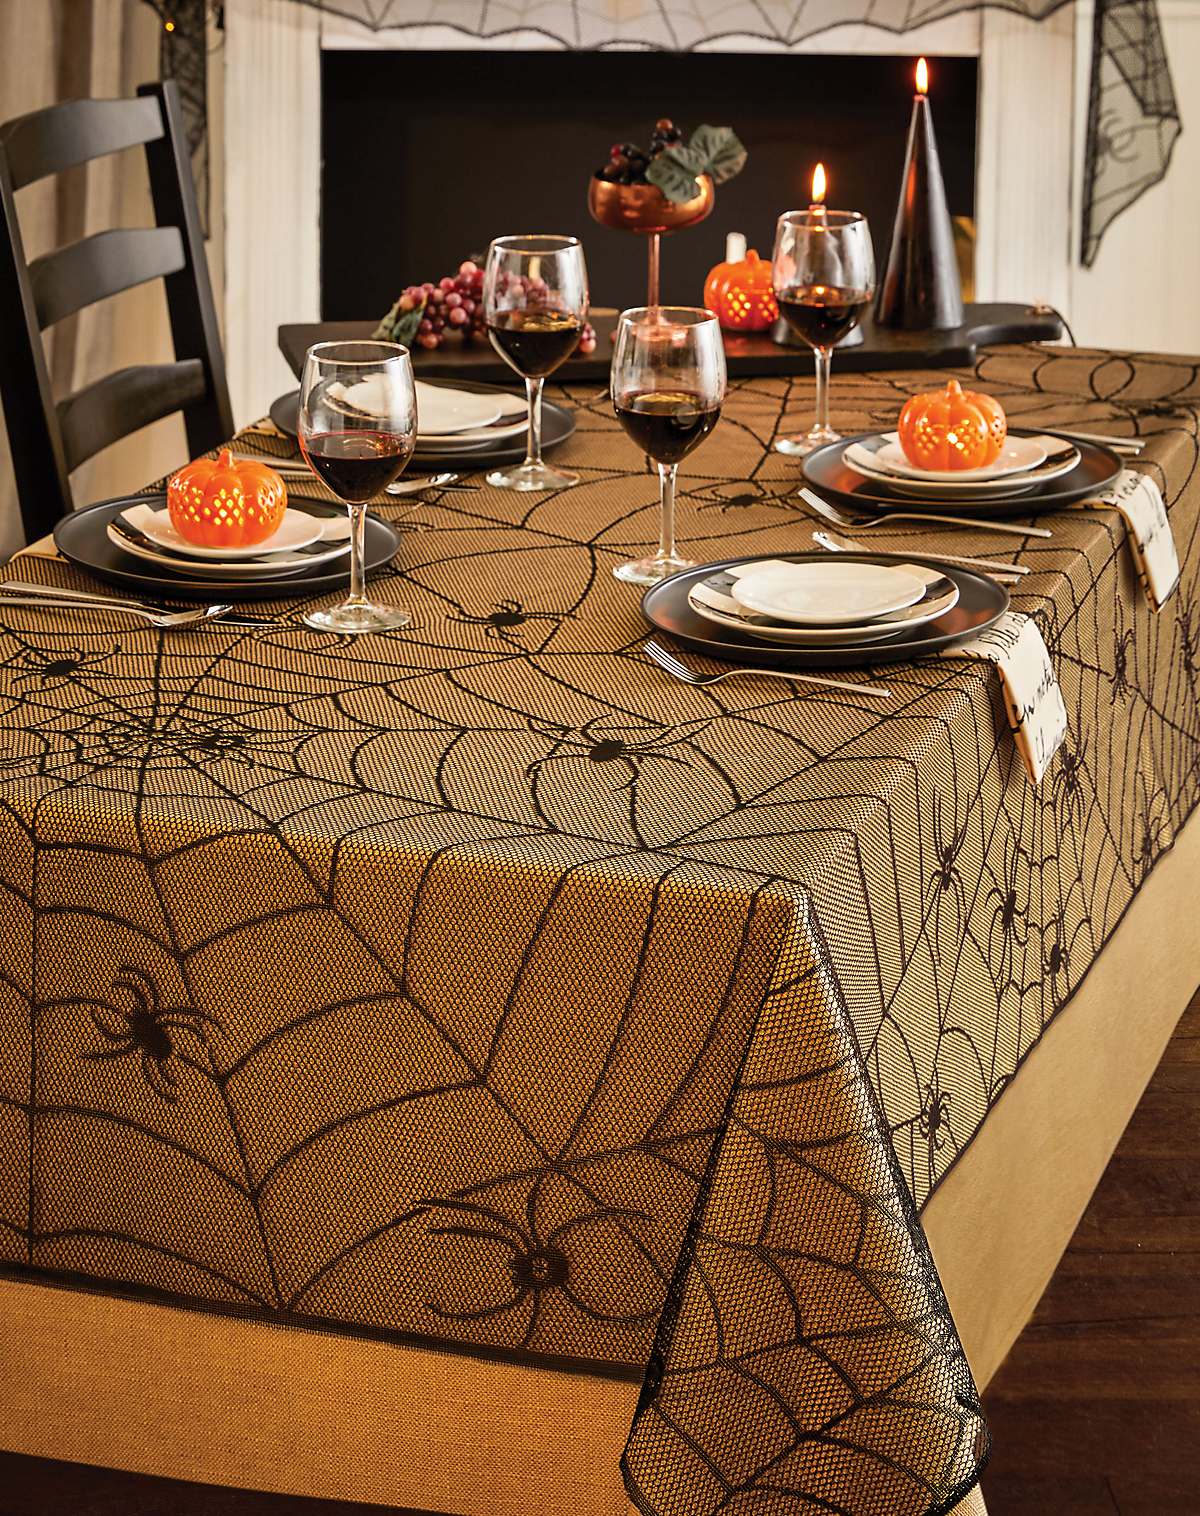 Spider Web Tablecloth